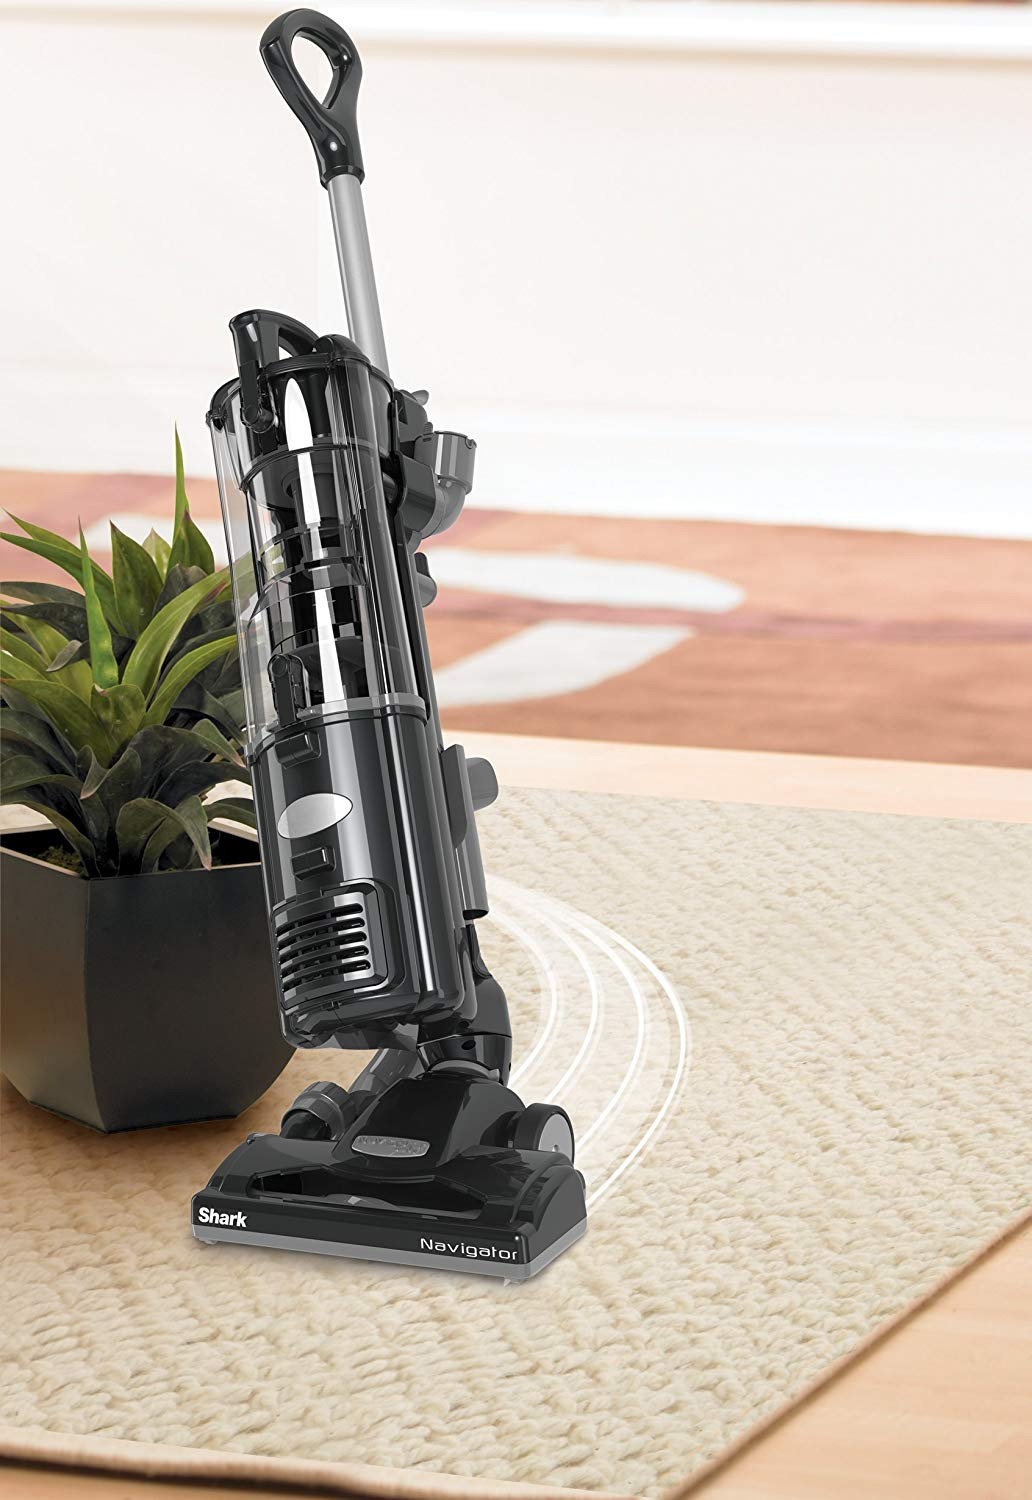 hardwood floor vacuum reviews 2016 of amazon com shark navigator upright corded bagless vacuum for amazon com shark navigator upright corded bagless vacuum lightweight large capacity for carpet and hard floor cleaning with swivel steering nv27gr